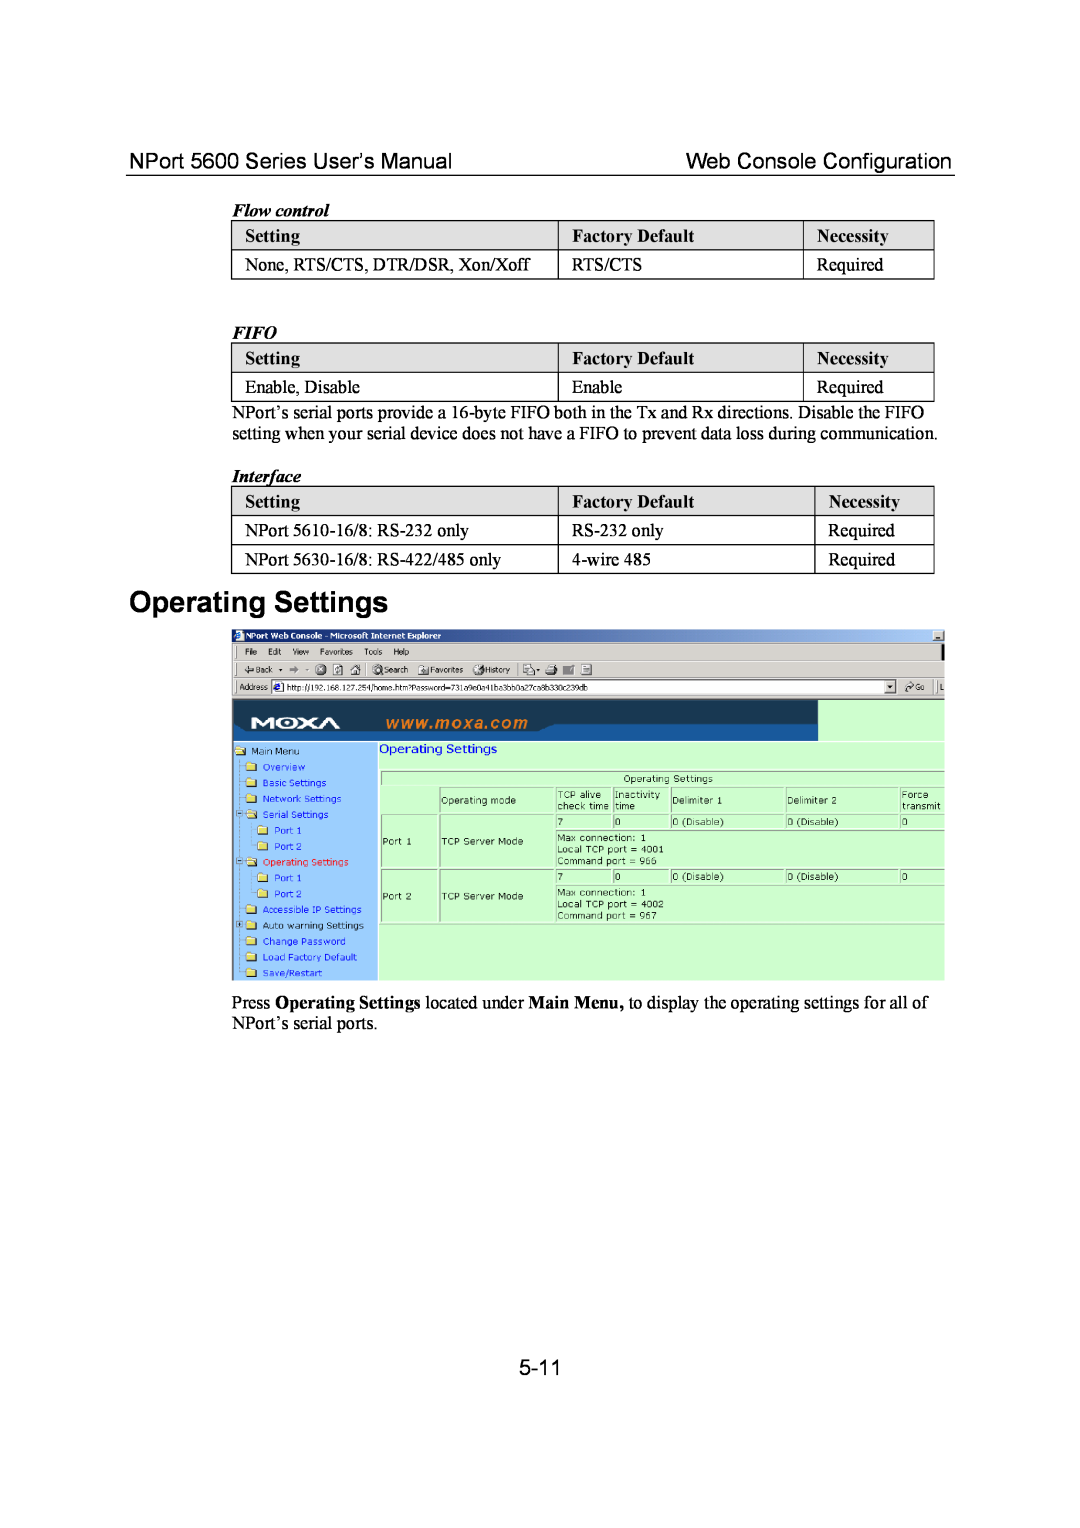 Moxa Technologies user manual Operating Settings, 5-11, NPort 5600 Series User’s Manual, Web Console Configuration 